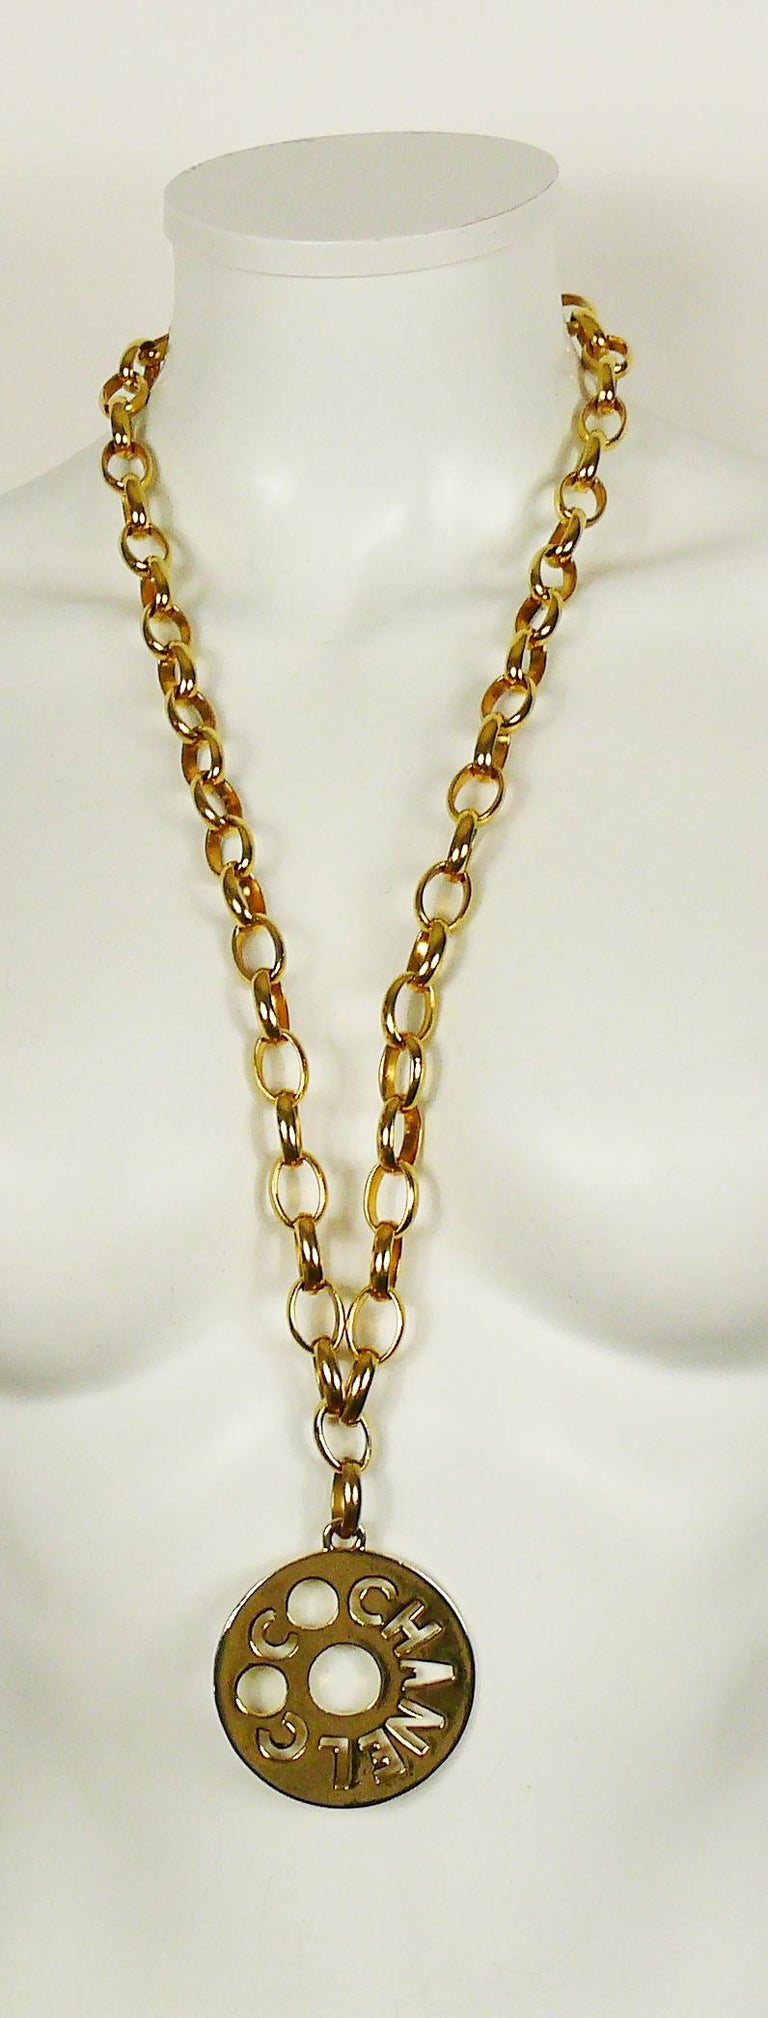 Set of 2 JBK Gold Paperclip Necklaces Designed by Coco Chanel - TMS1